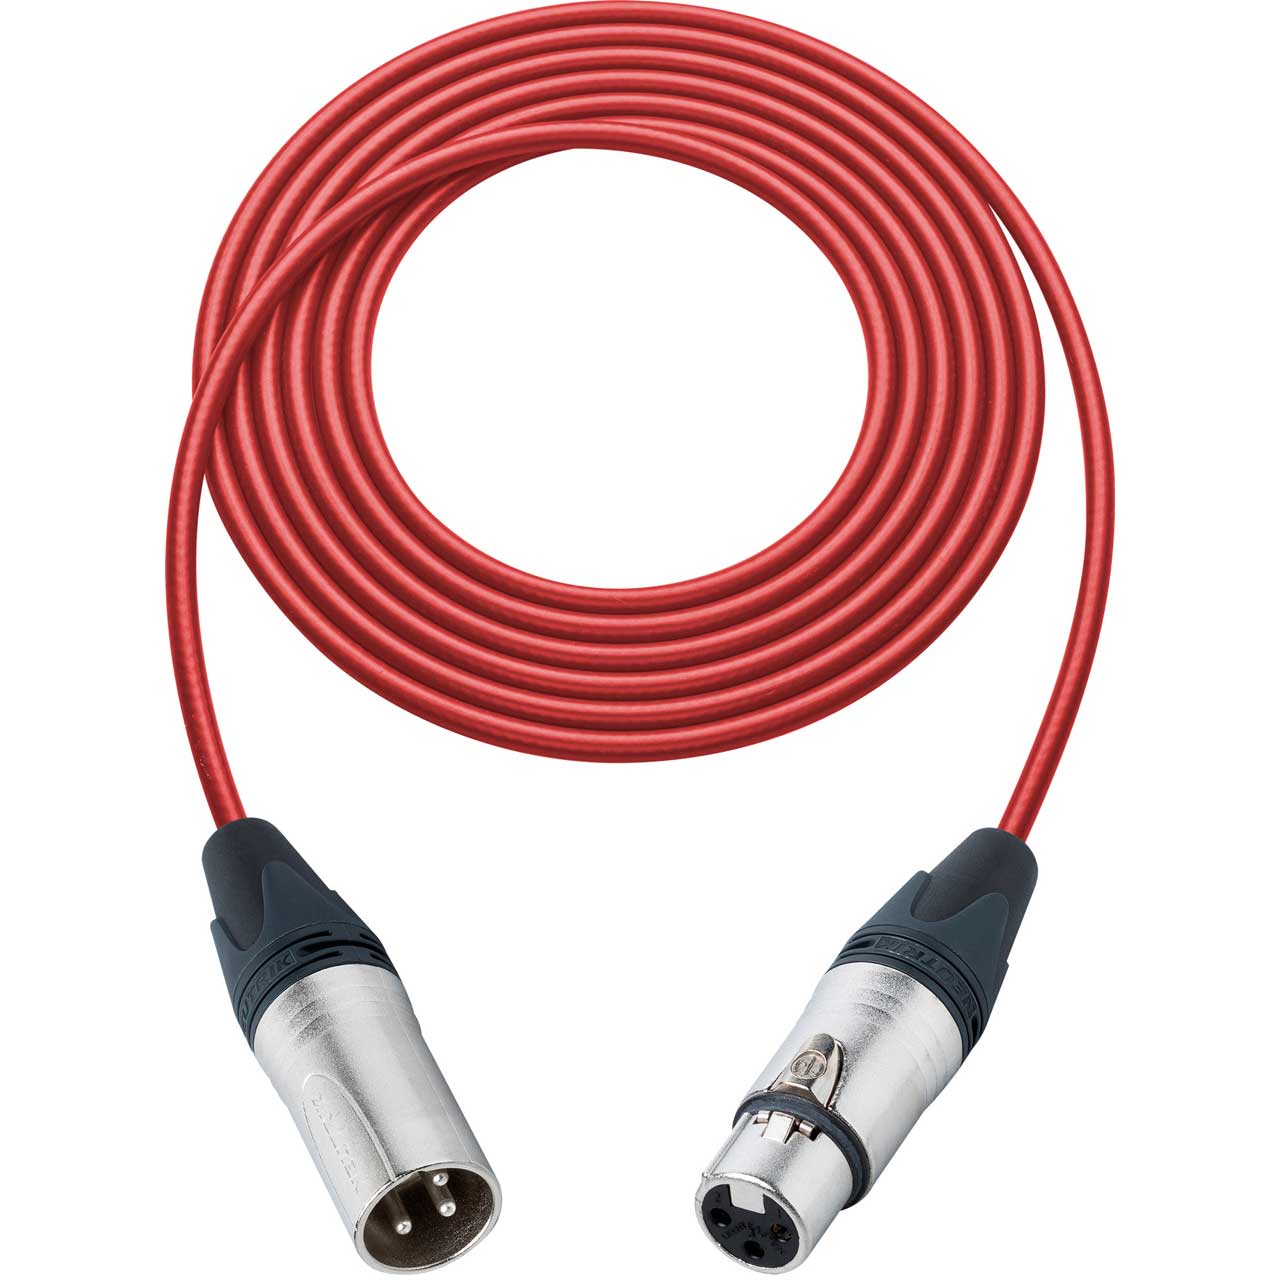 Sescom SC100XXJRD Mic Cable Canare Star-Quad 3-Pin XLR Male to 3-Pin XLR Female Red - 100 Foot